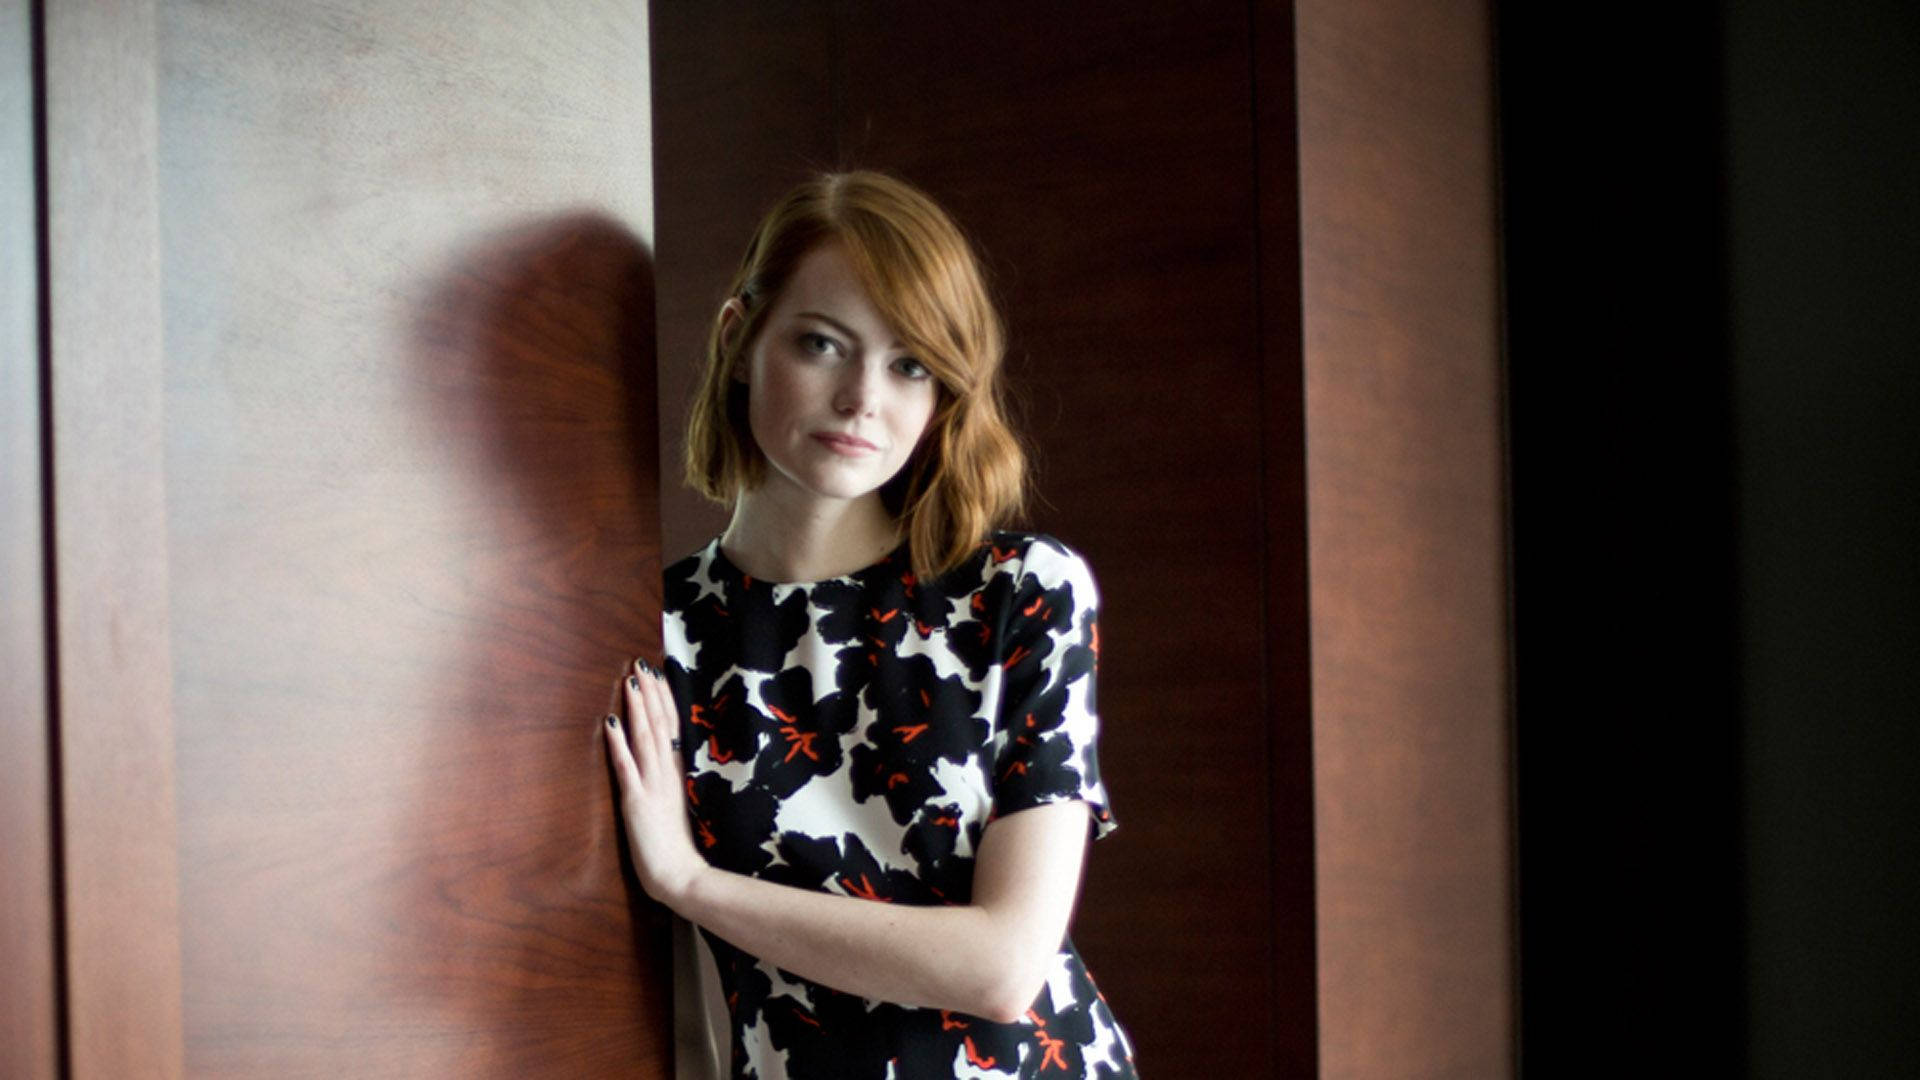 Emma Stone Smiles Confidently In A Stunning Portrait. Background